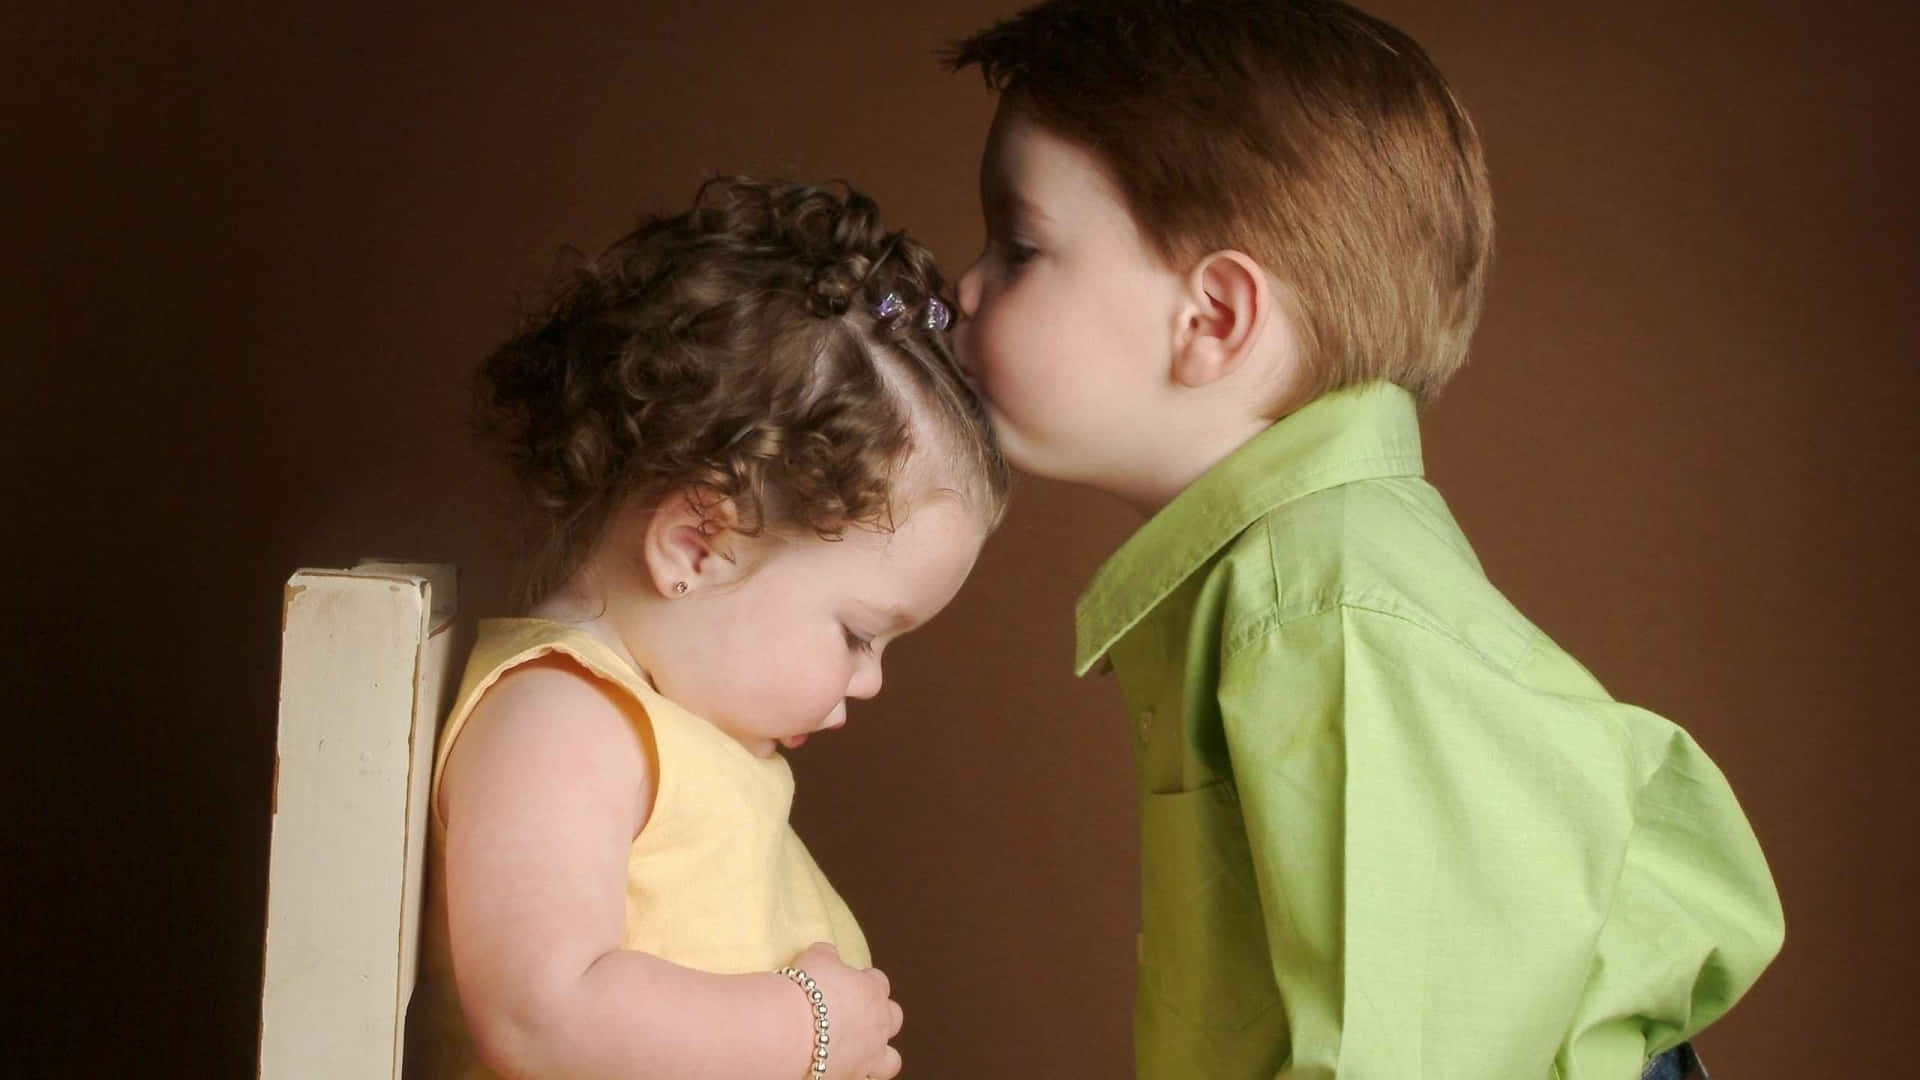 "Innocent Sweetness: A Cute Baby Couple's Foremost Kiss" Wallpaper